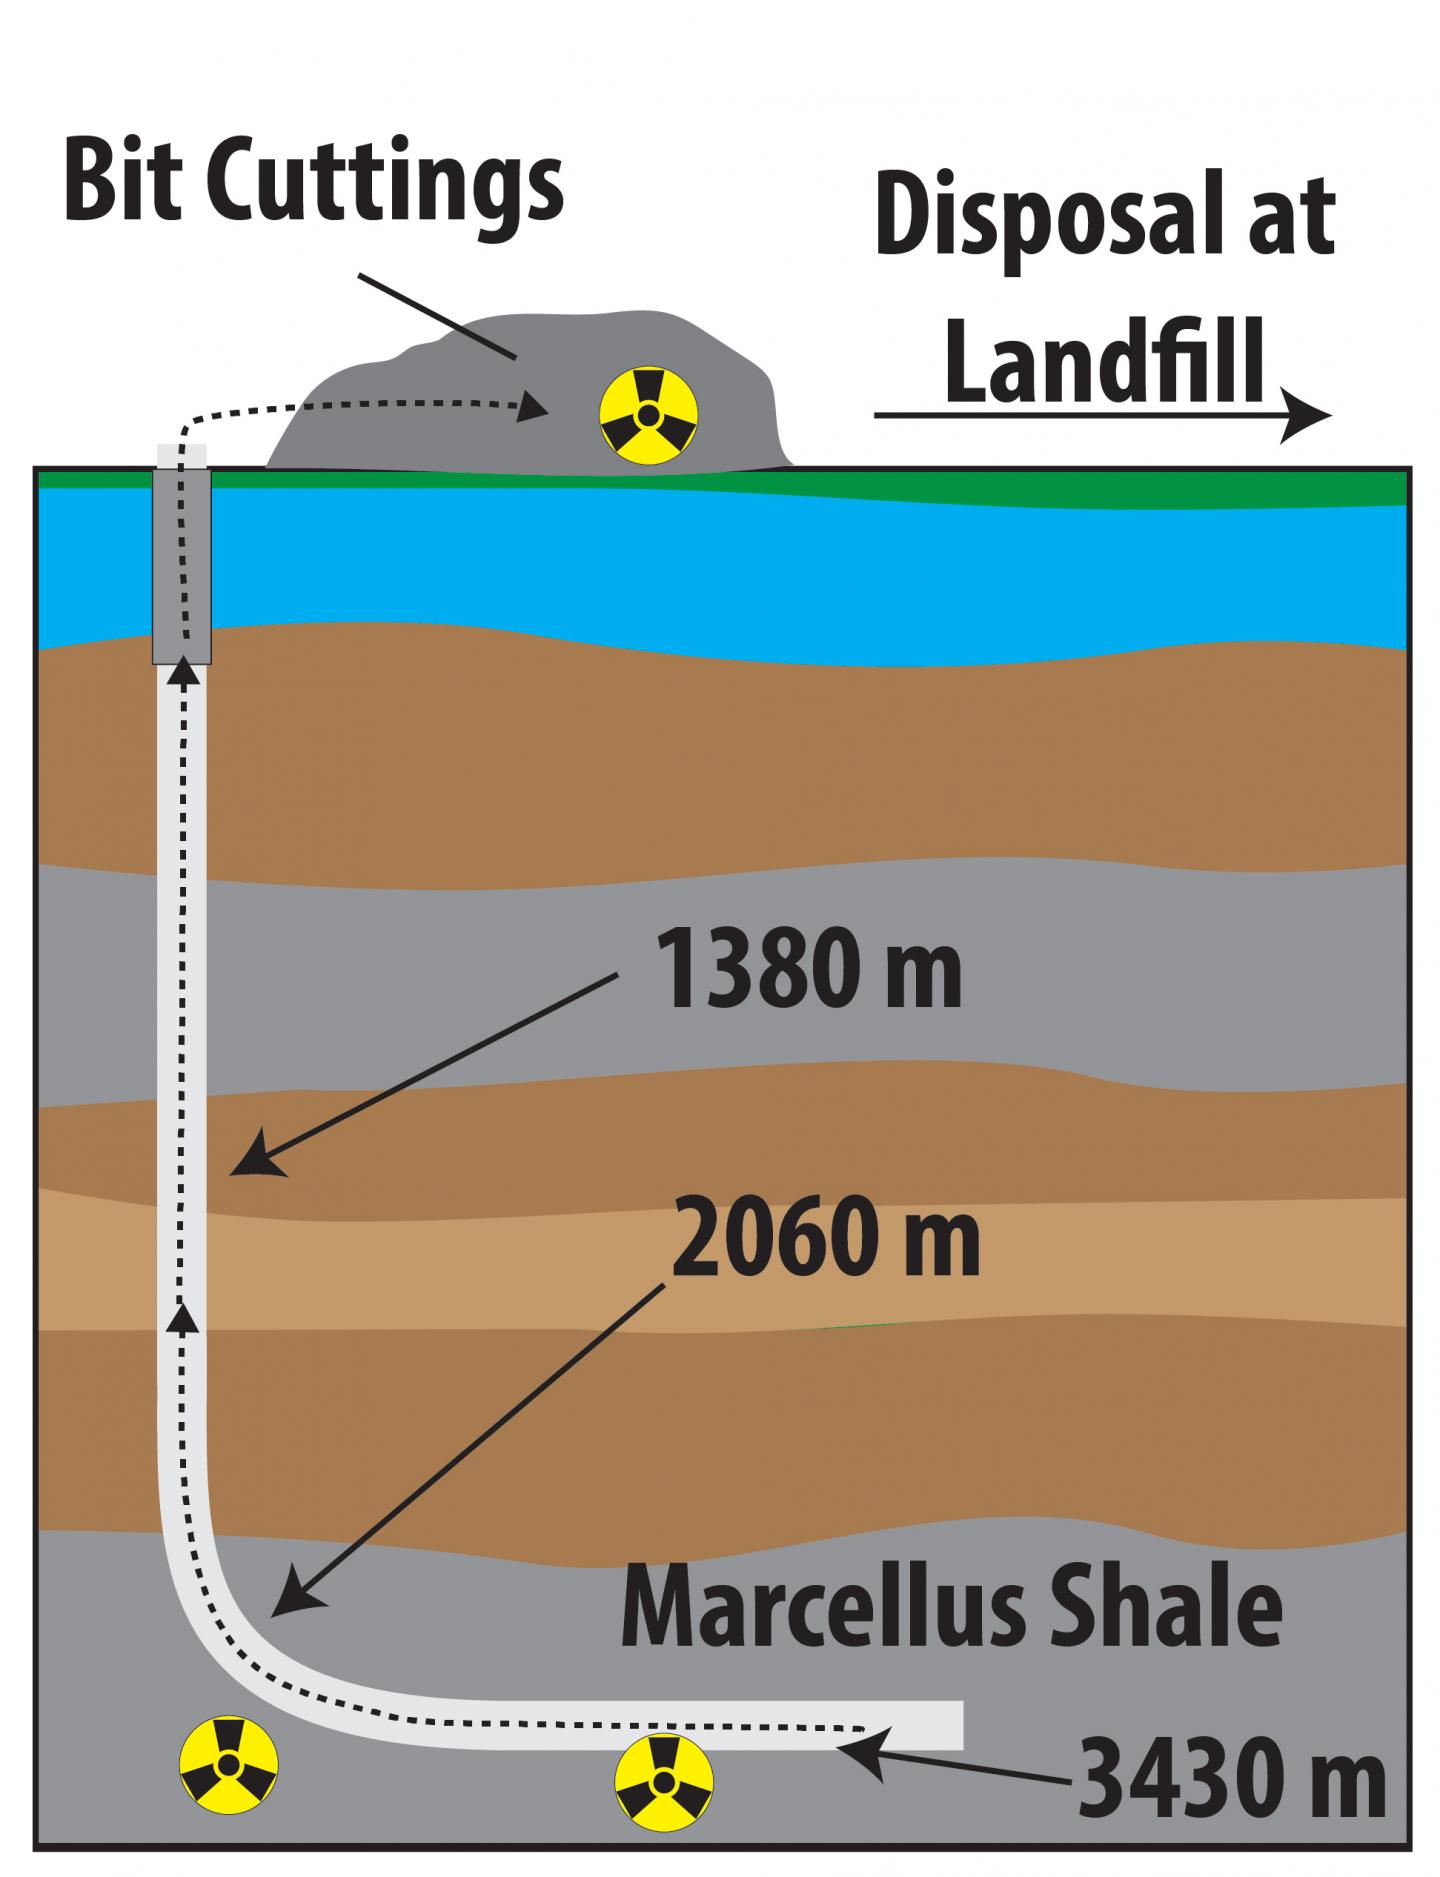 Solid waste from horizontal gas wells contains radioactive material